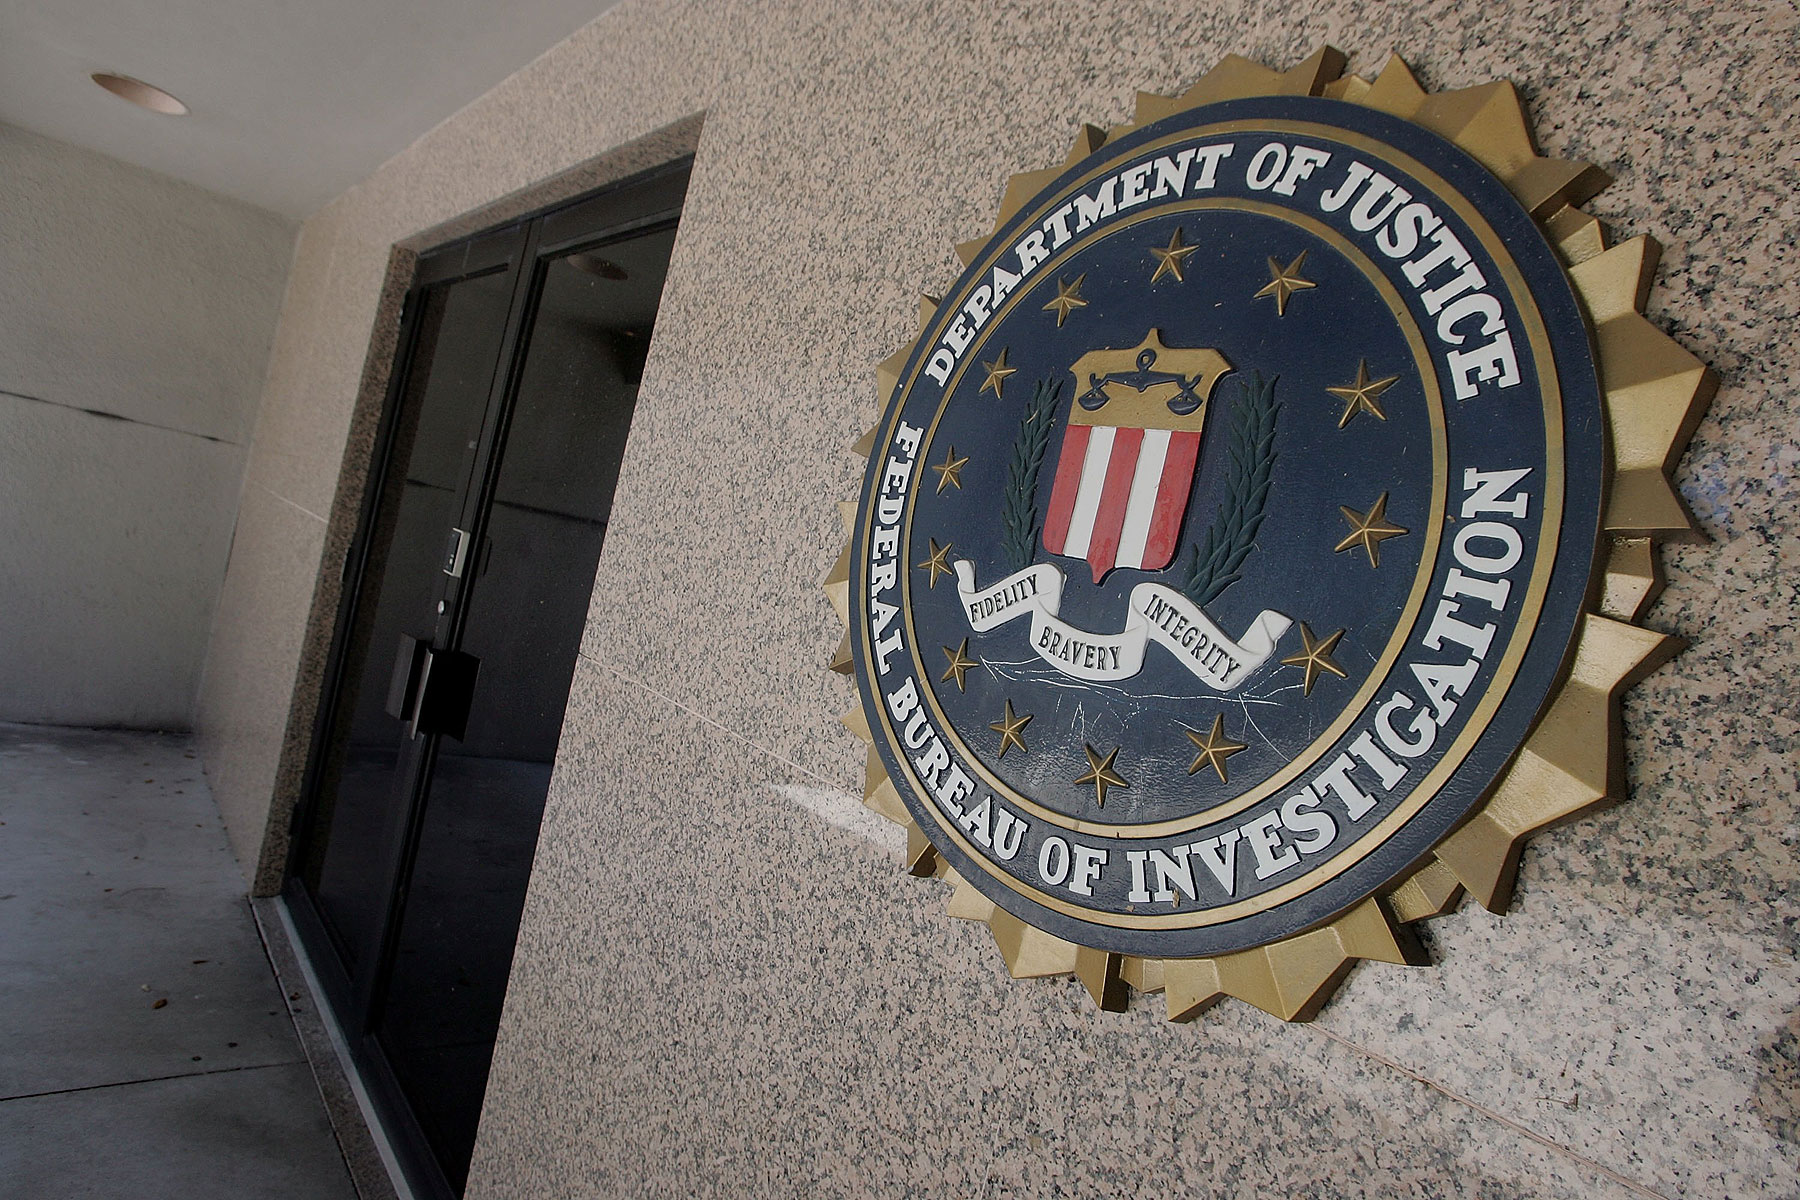 The FBI building is seen in Miami. (Joe Raedle—Getty Images)